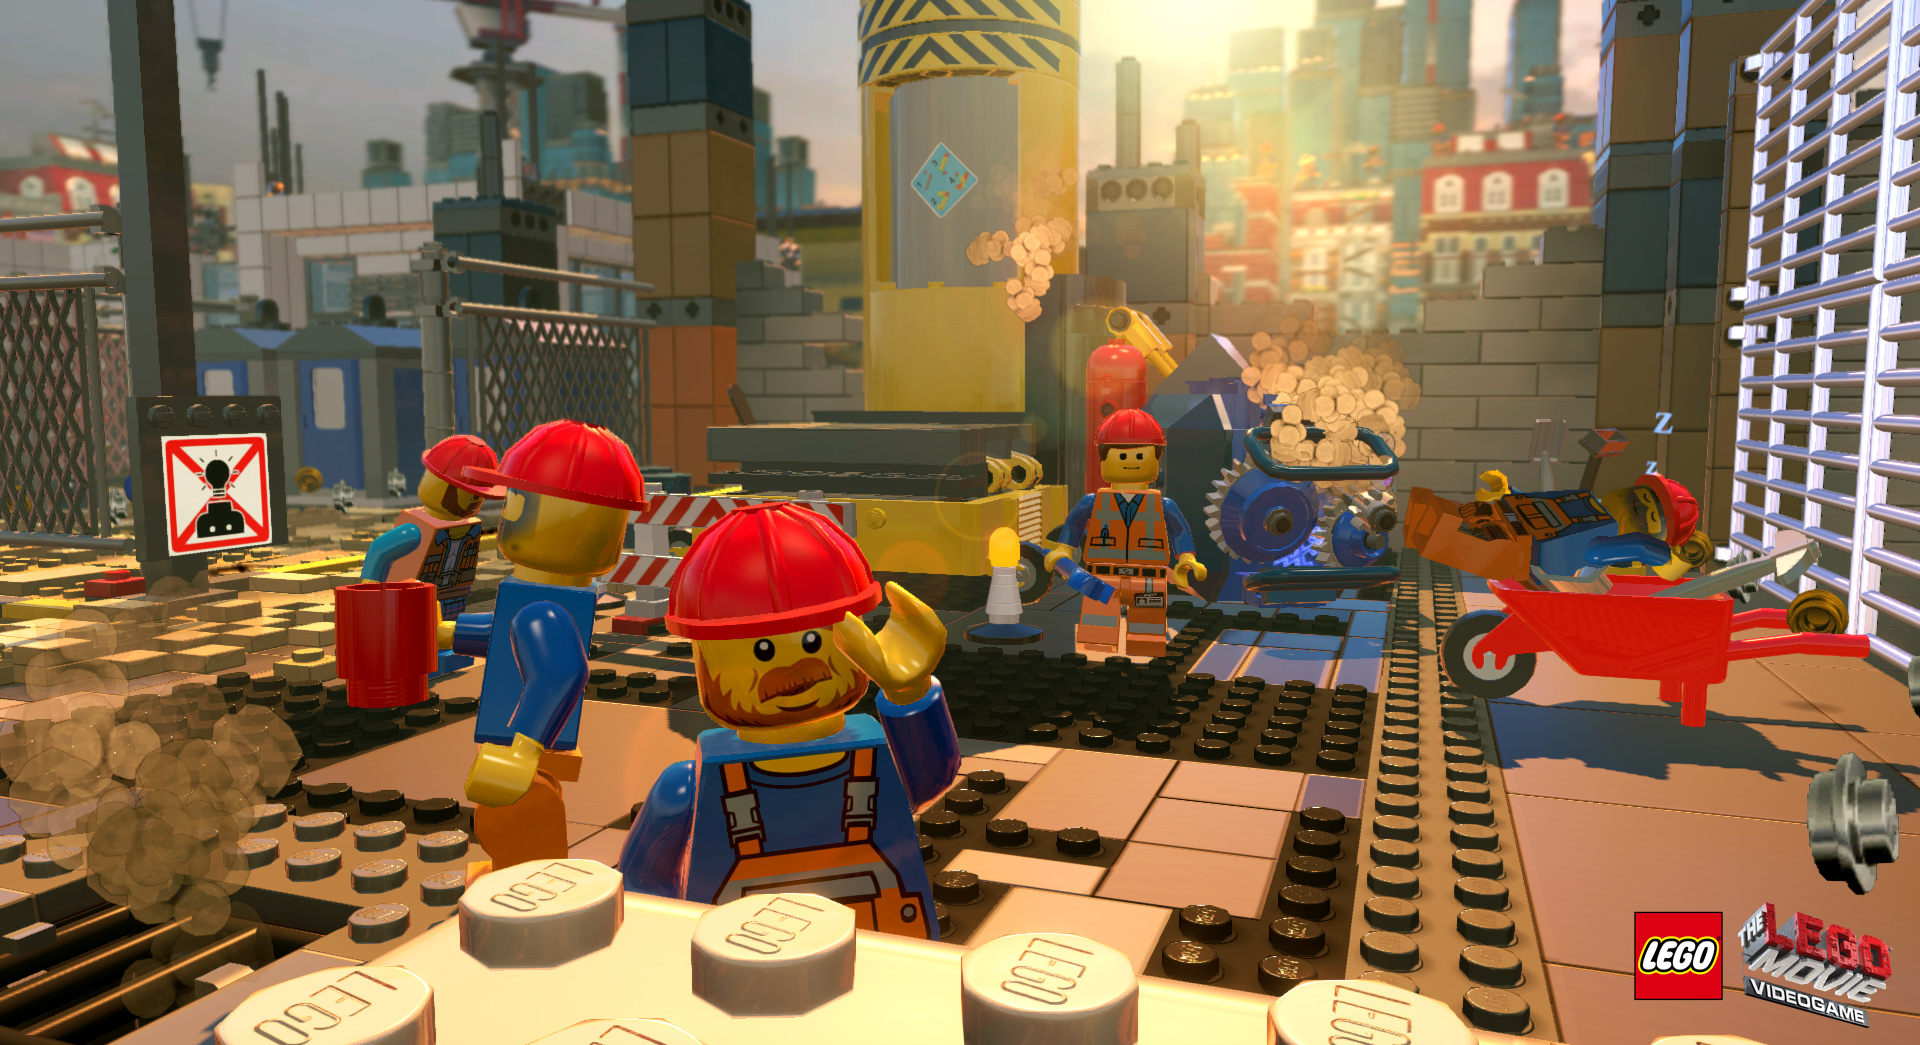 The LEGO Movie Videogame - PlayStation 4 - image 2 of 8